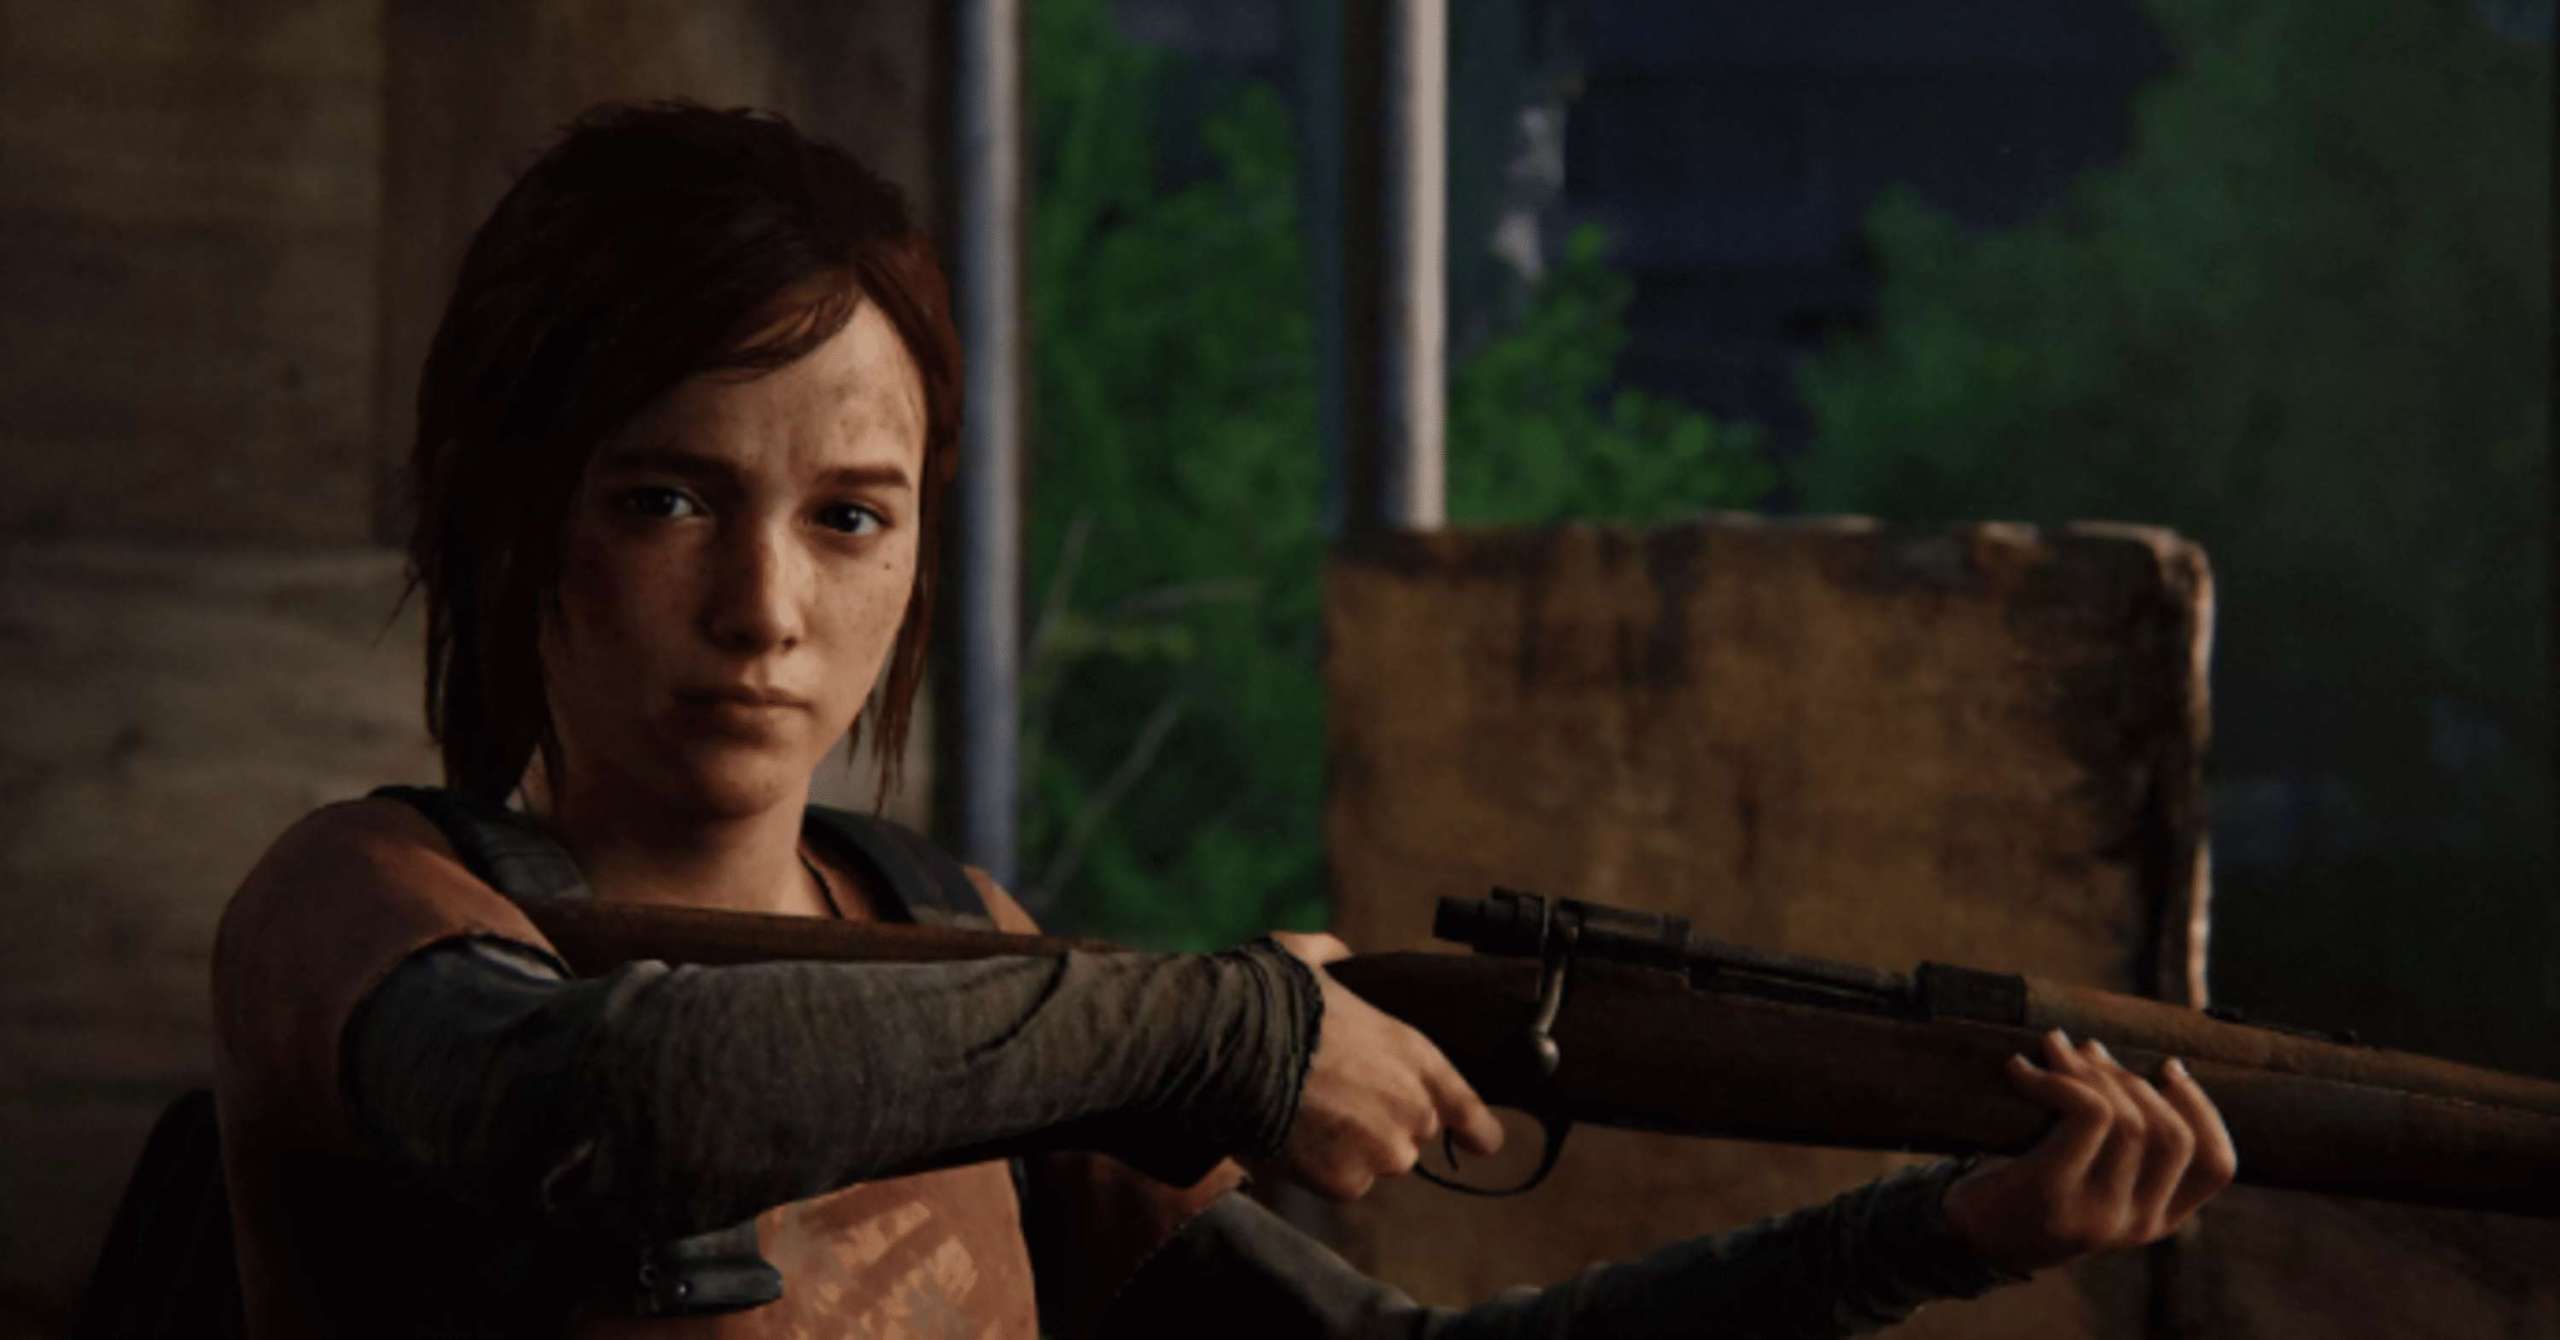 A Board Game Based On The Last Of Us Is In The Works